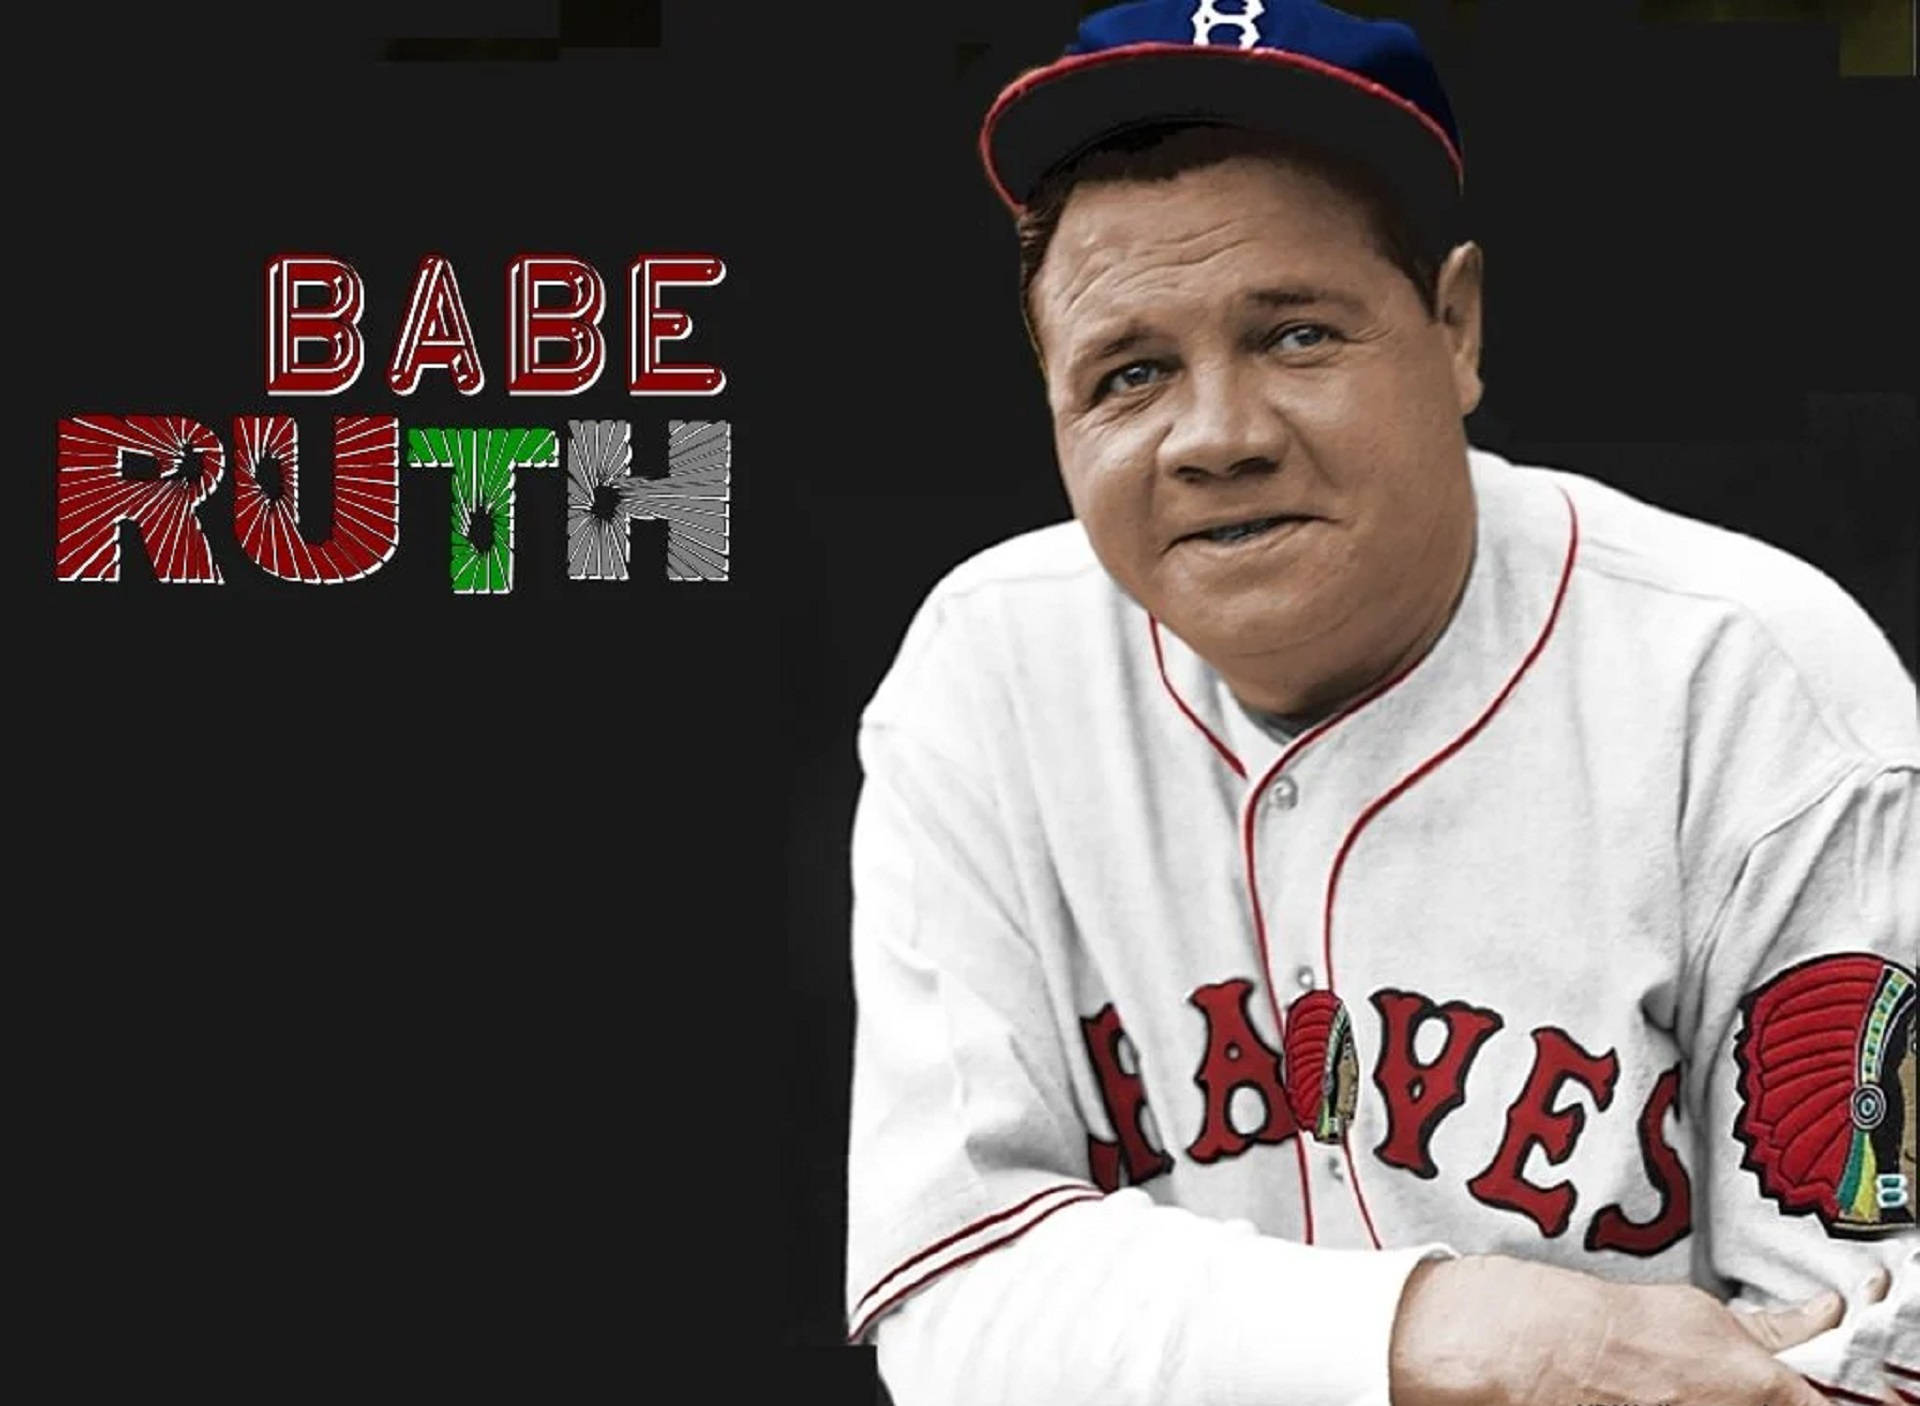 Babe Ruth Poster In Black